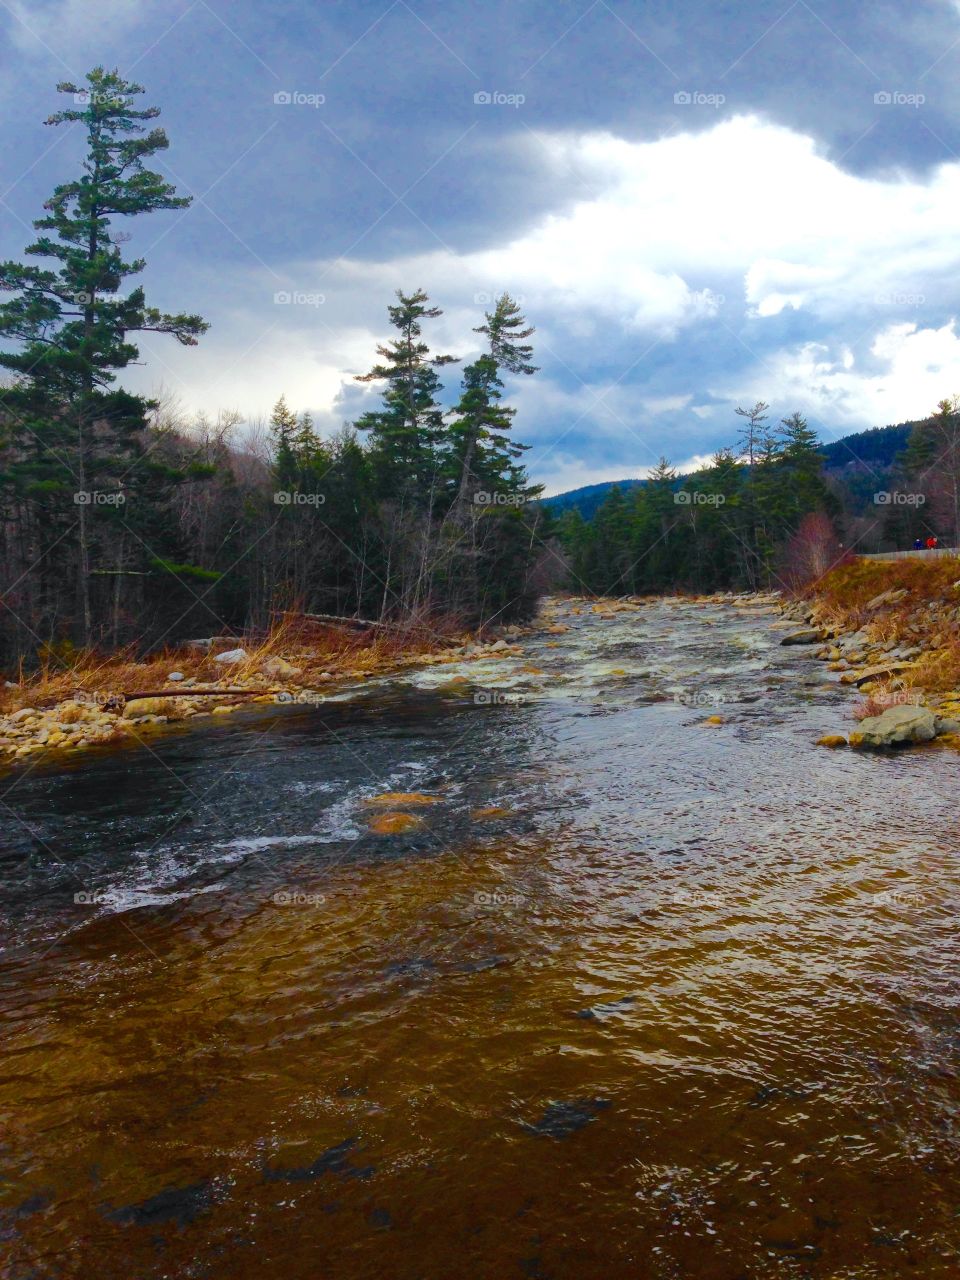 A beautiful River in the White Mountains, New Hampshire 